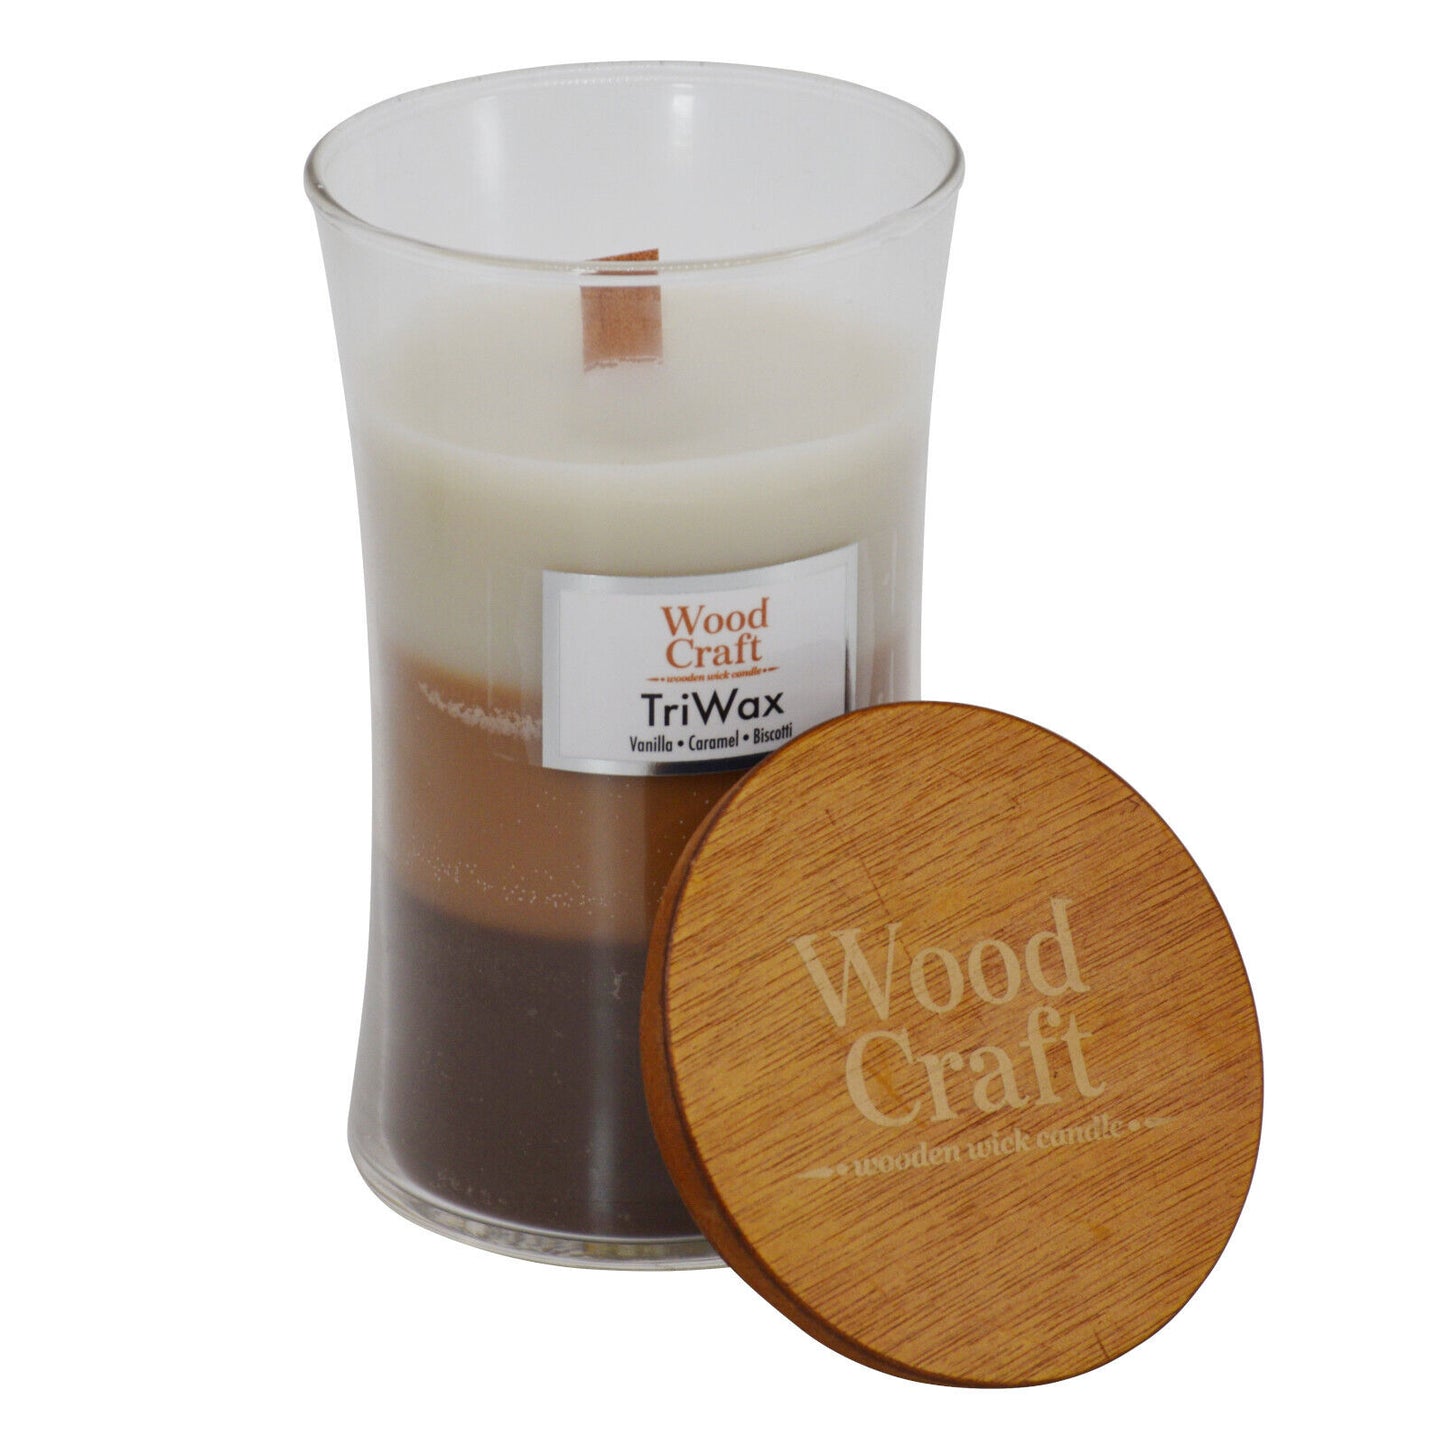 3x Woodcraft Large Hourglass Crackling Wooden Wick Scented Candle 595g/145 Hour